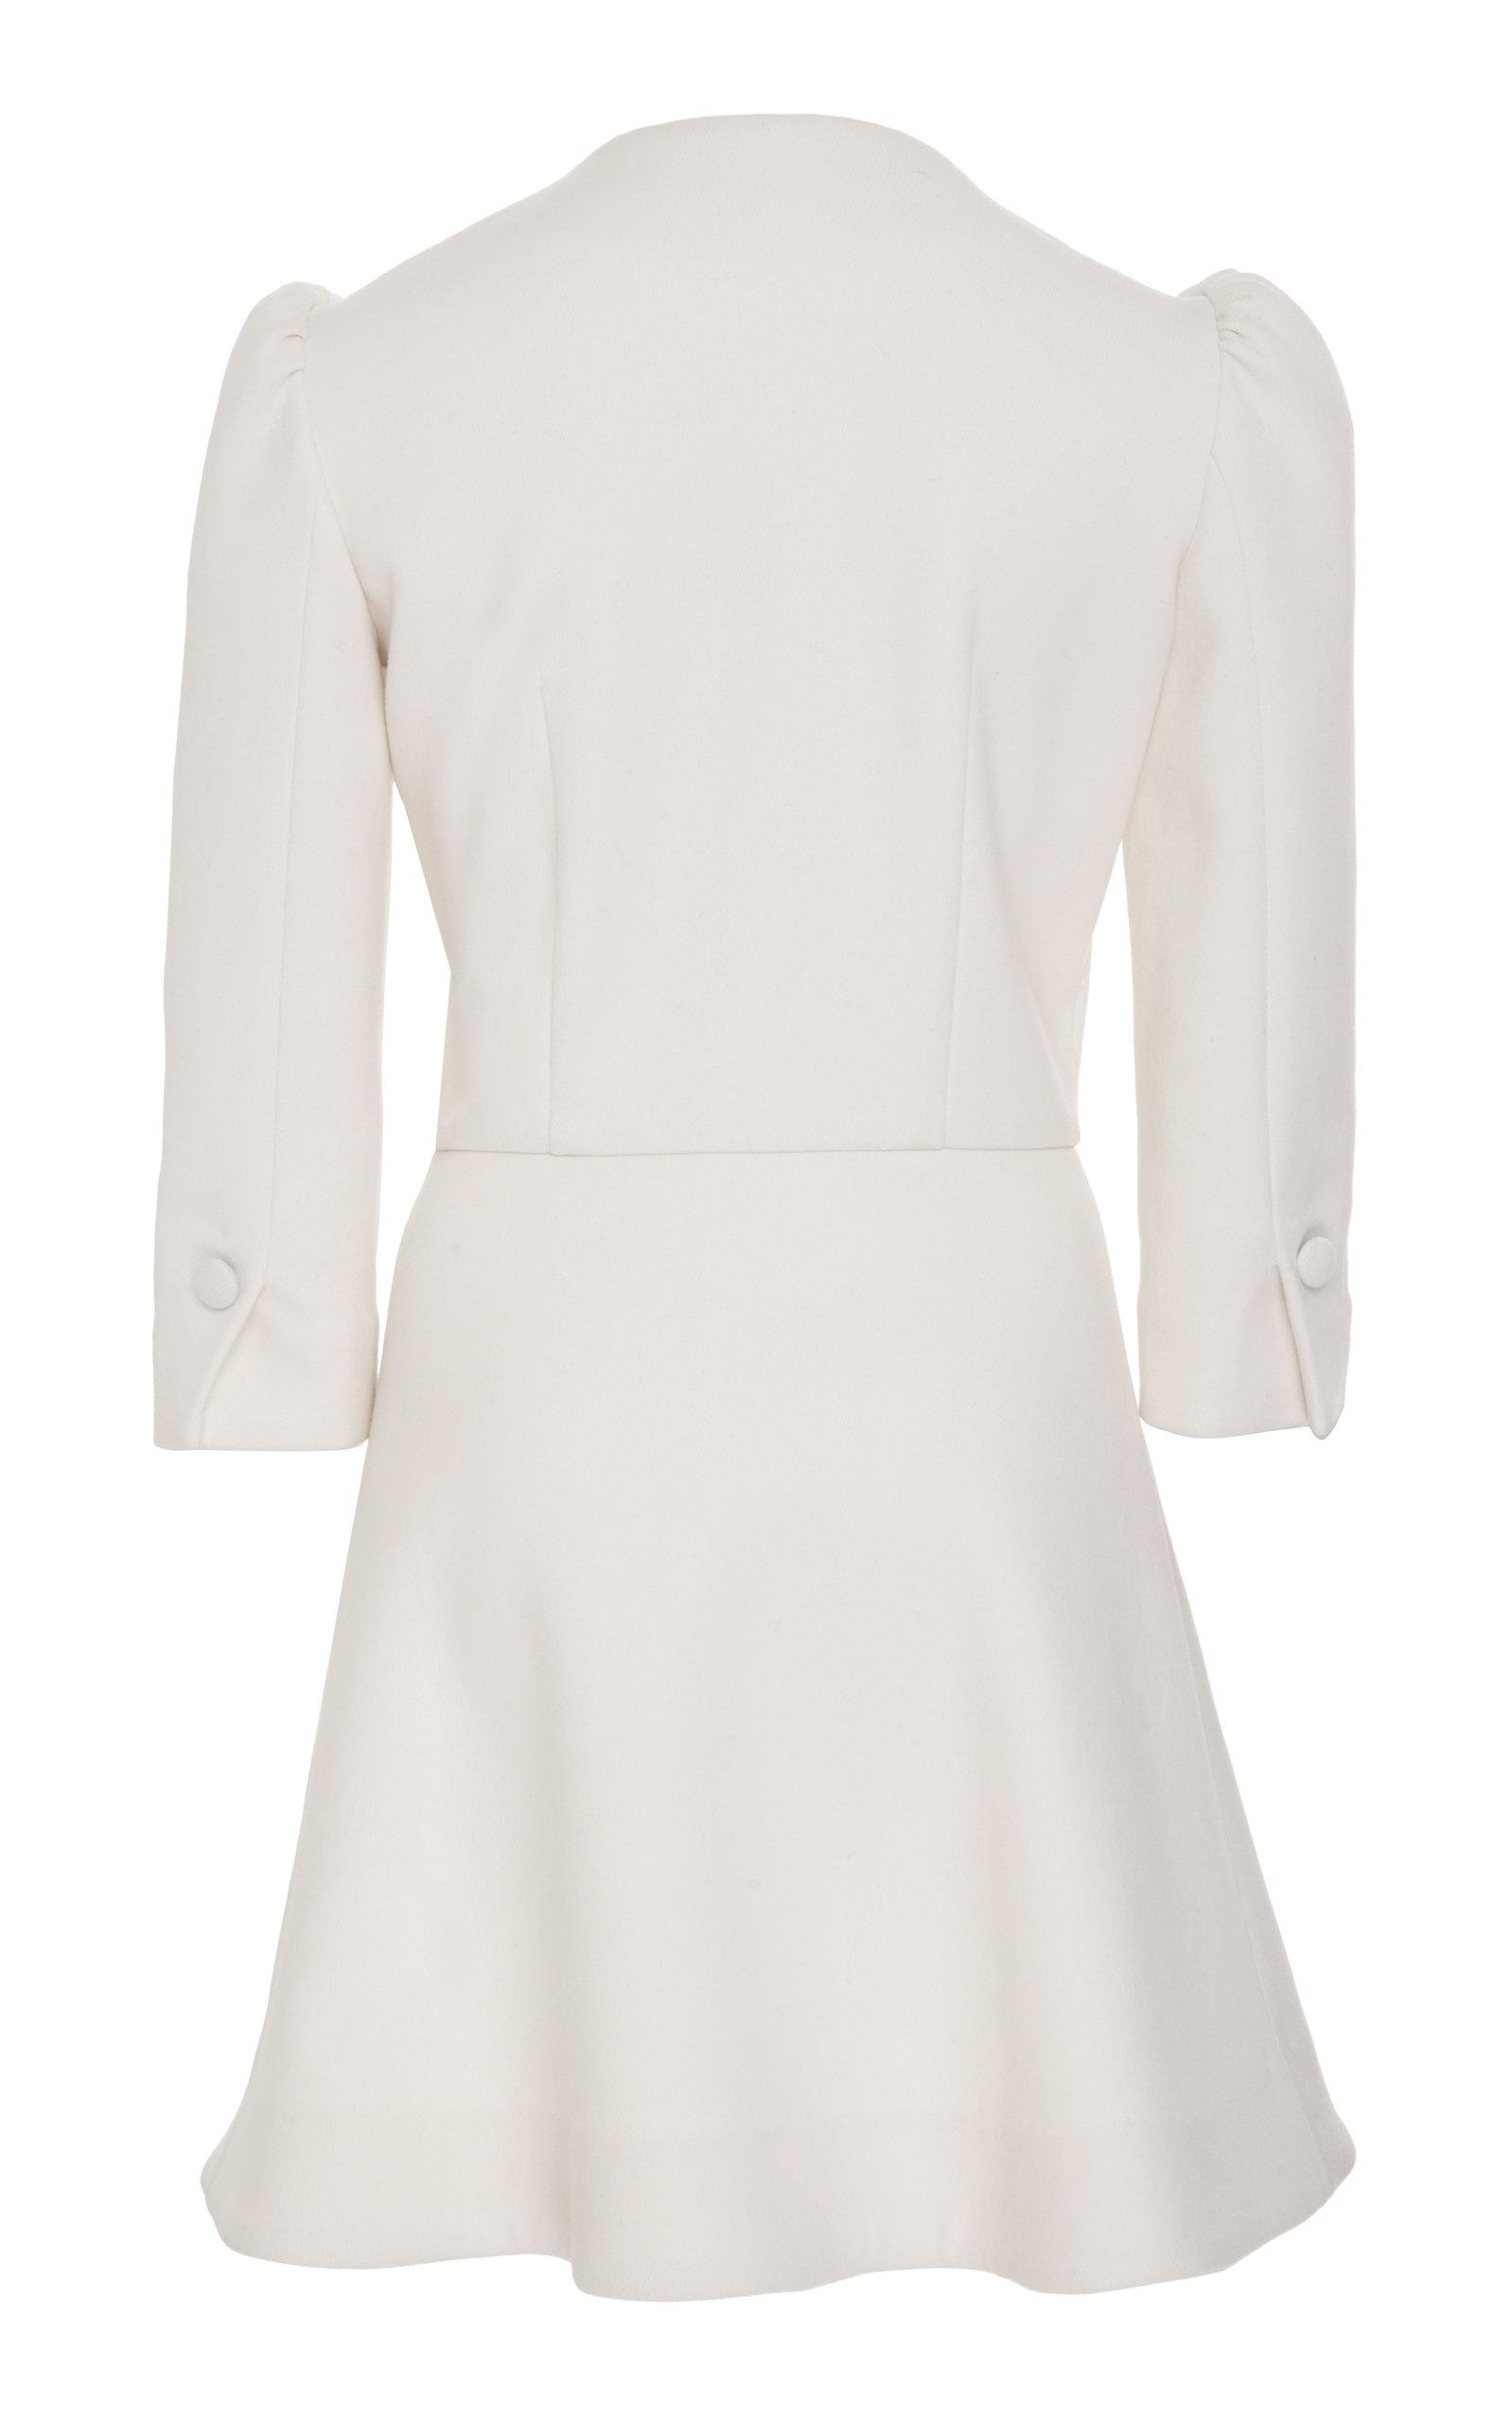 Lein Wool Button Front Mini Dress in White - Lyst